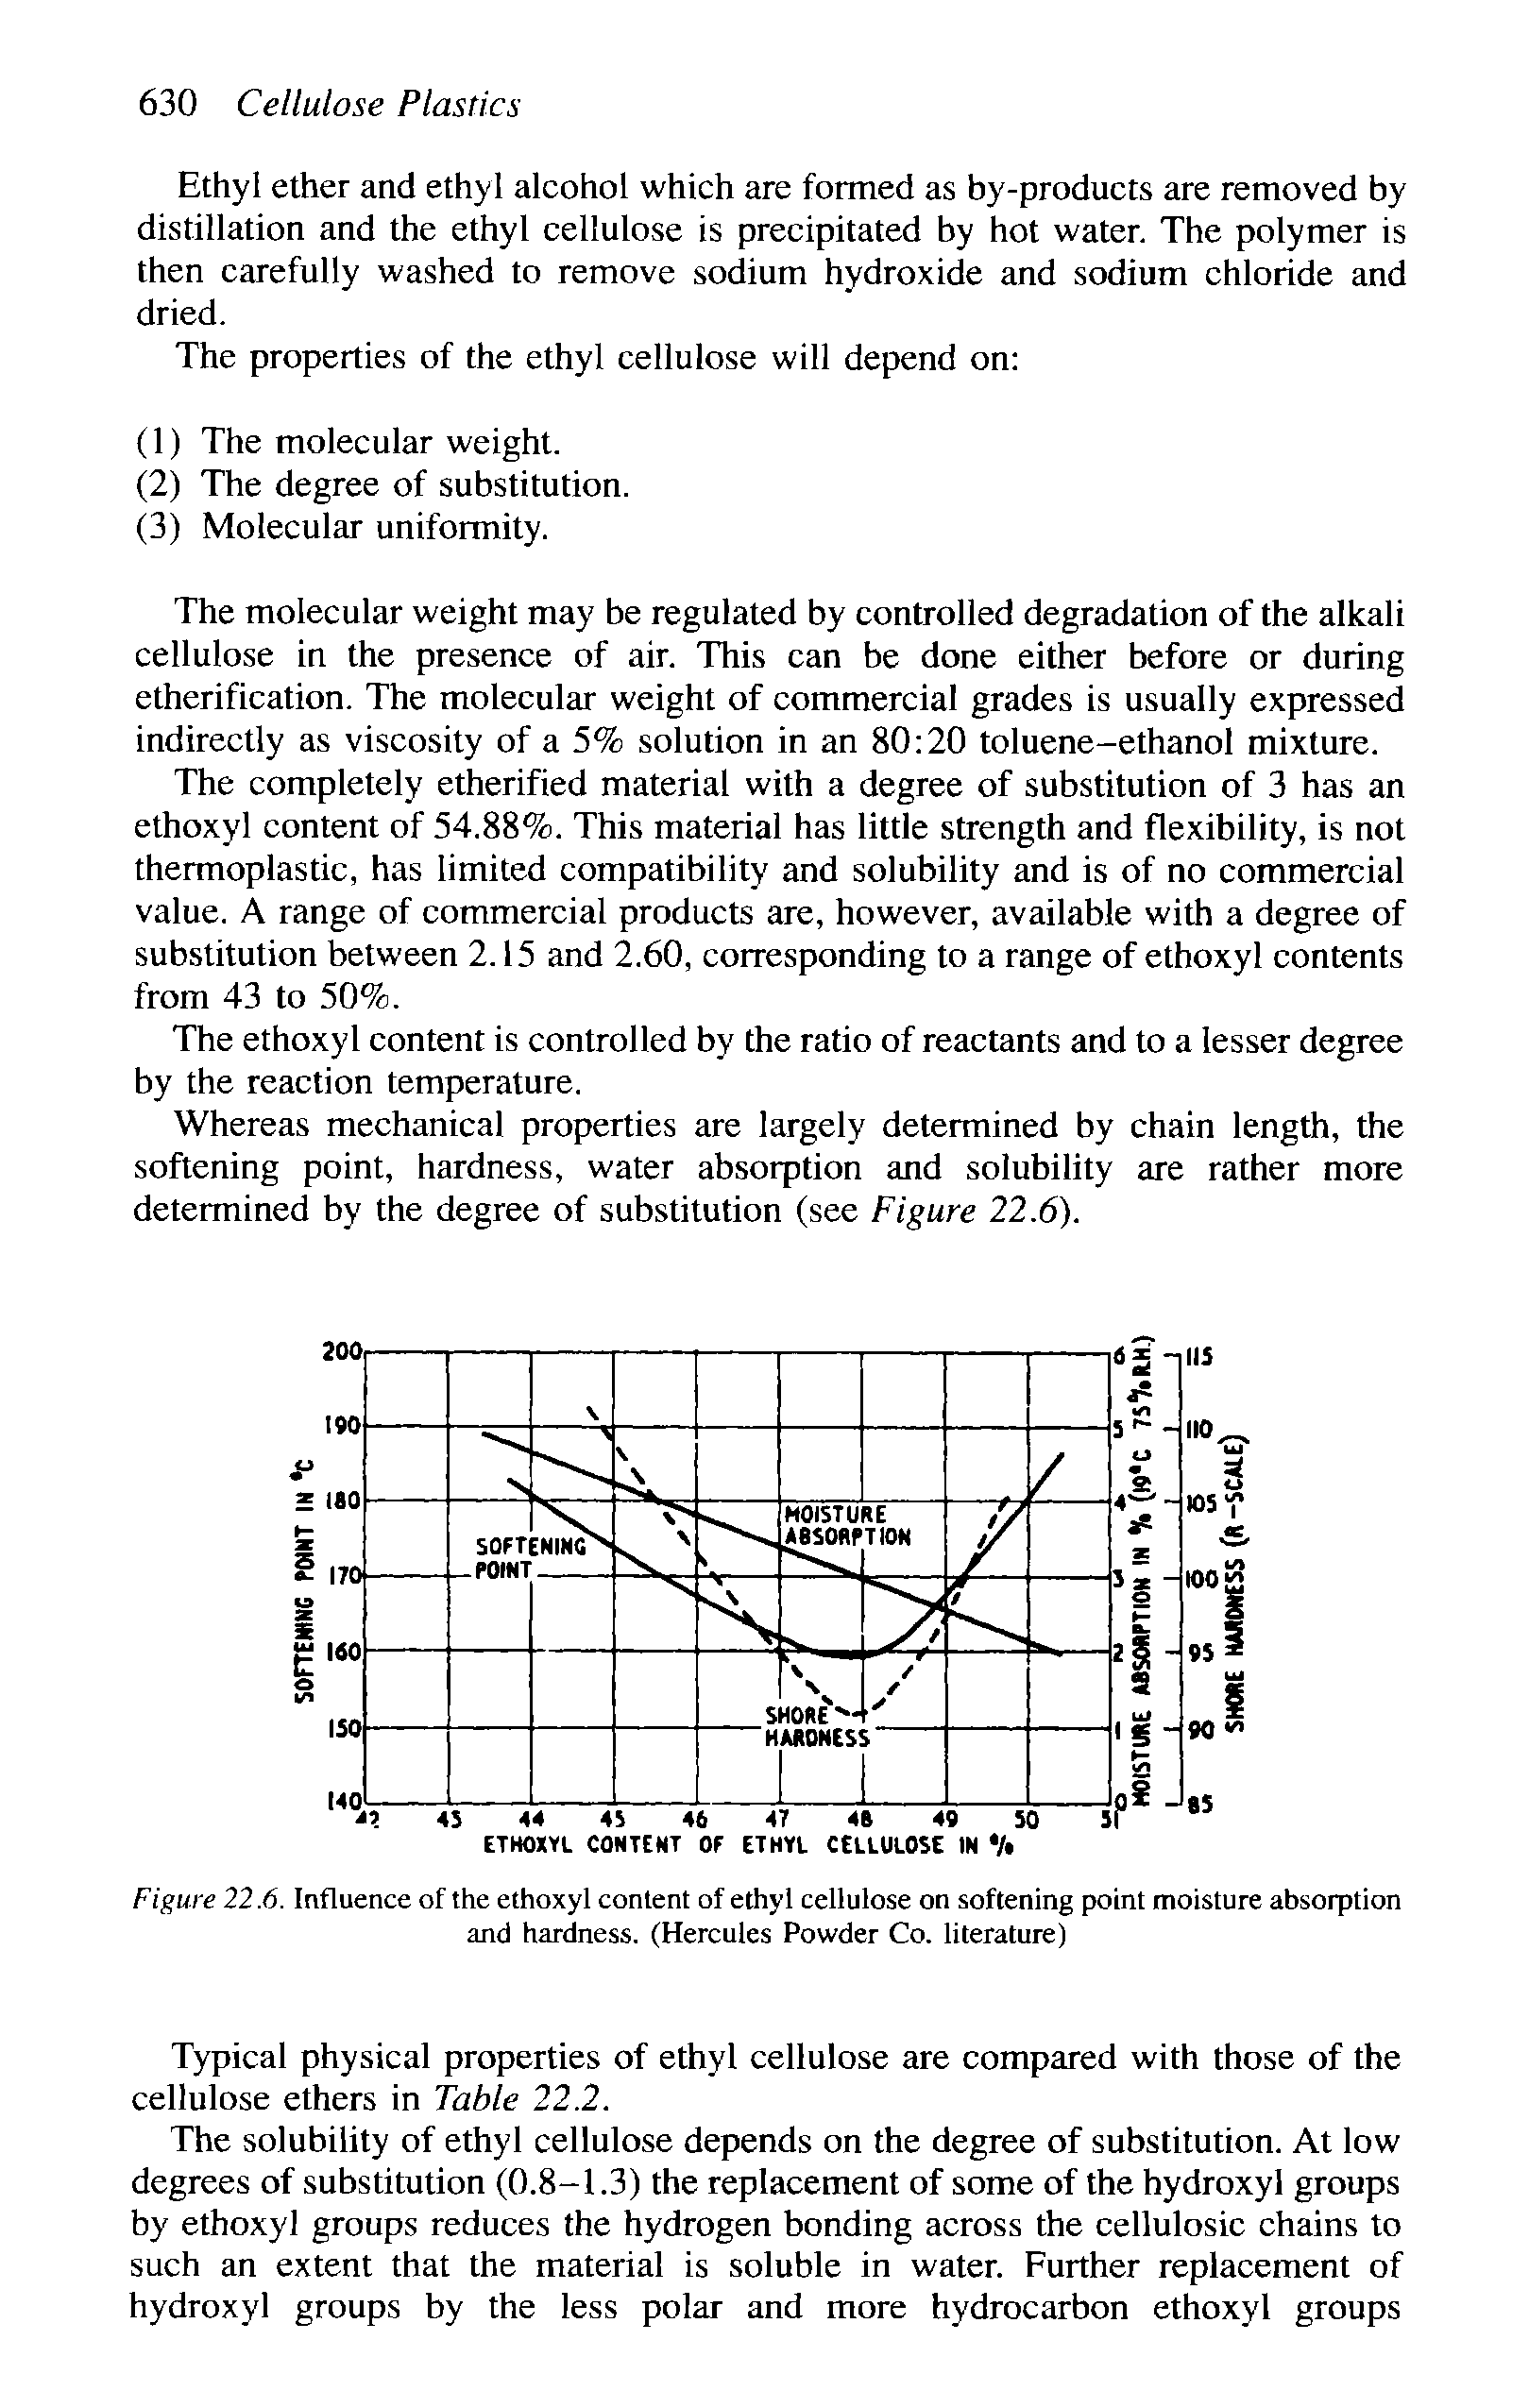 Figure 22.6. Influence of the ethoxyl content of ethyl cellulose on softening point moisture absorption and hardness. (Hercules Powder Co. literature)...